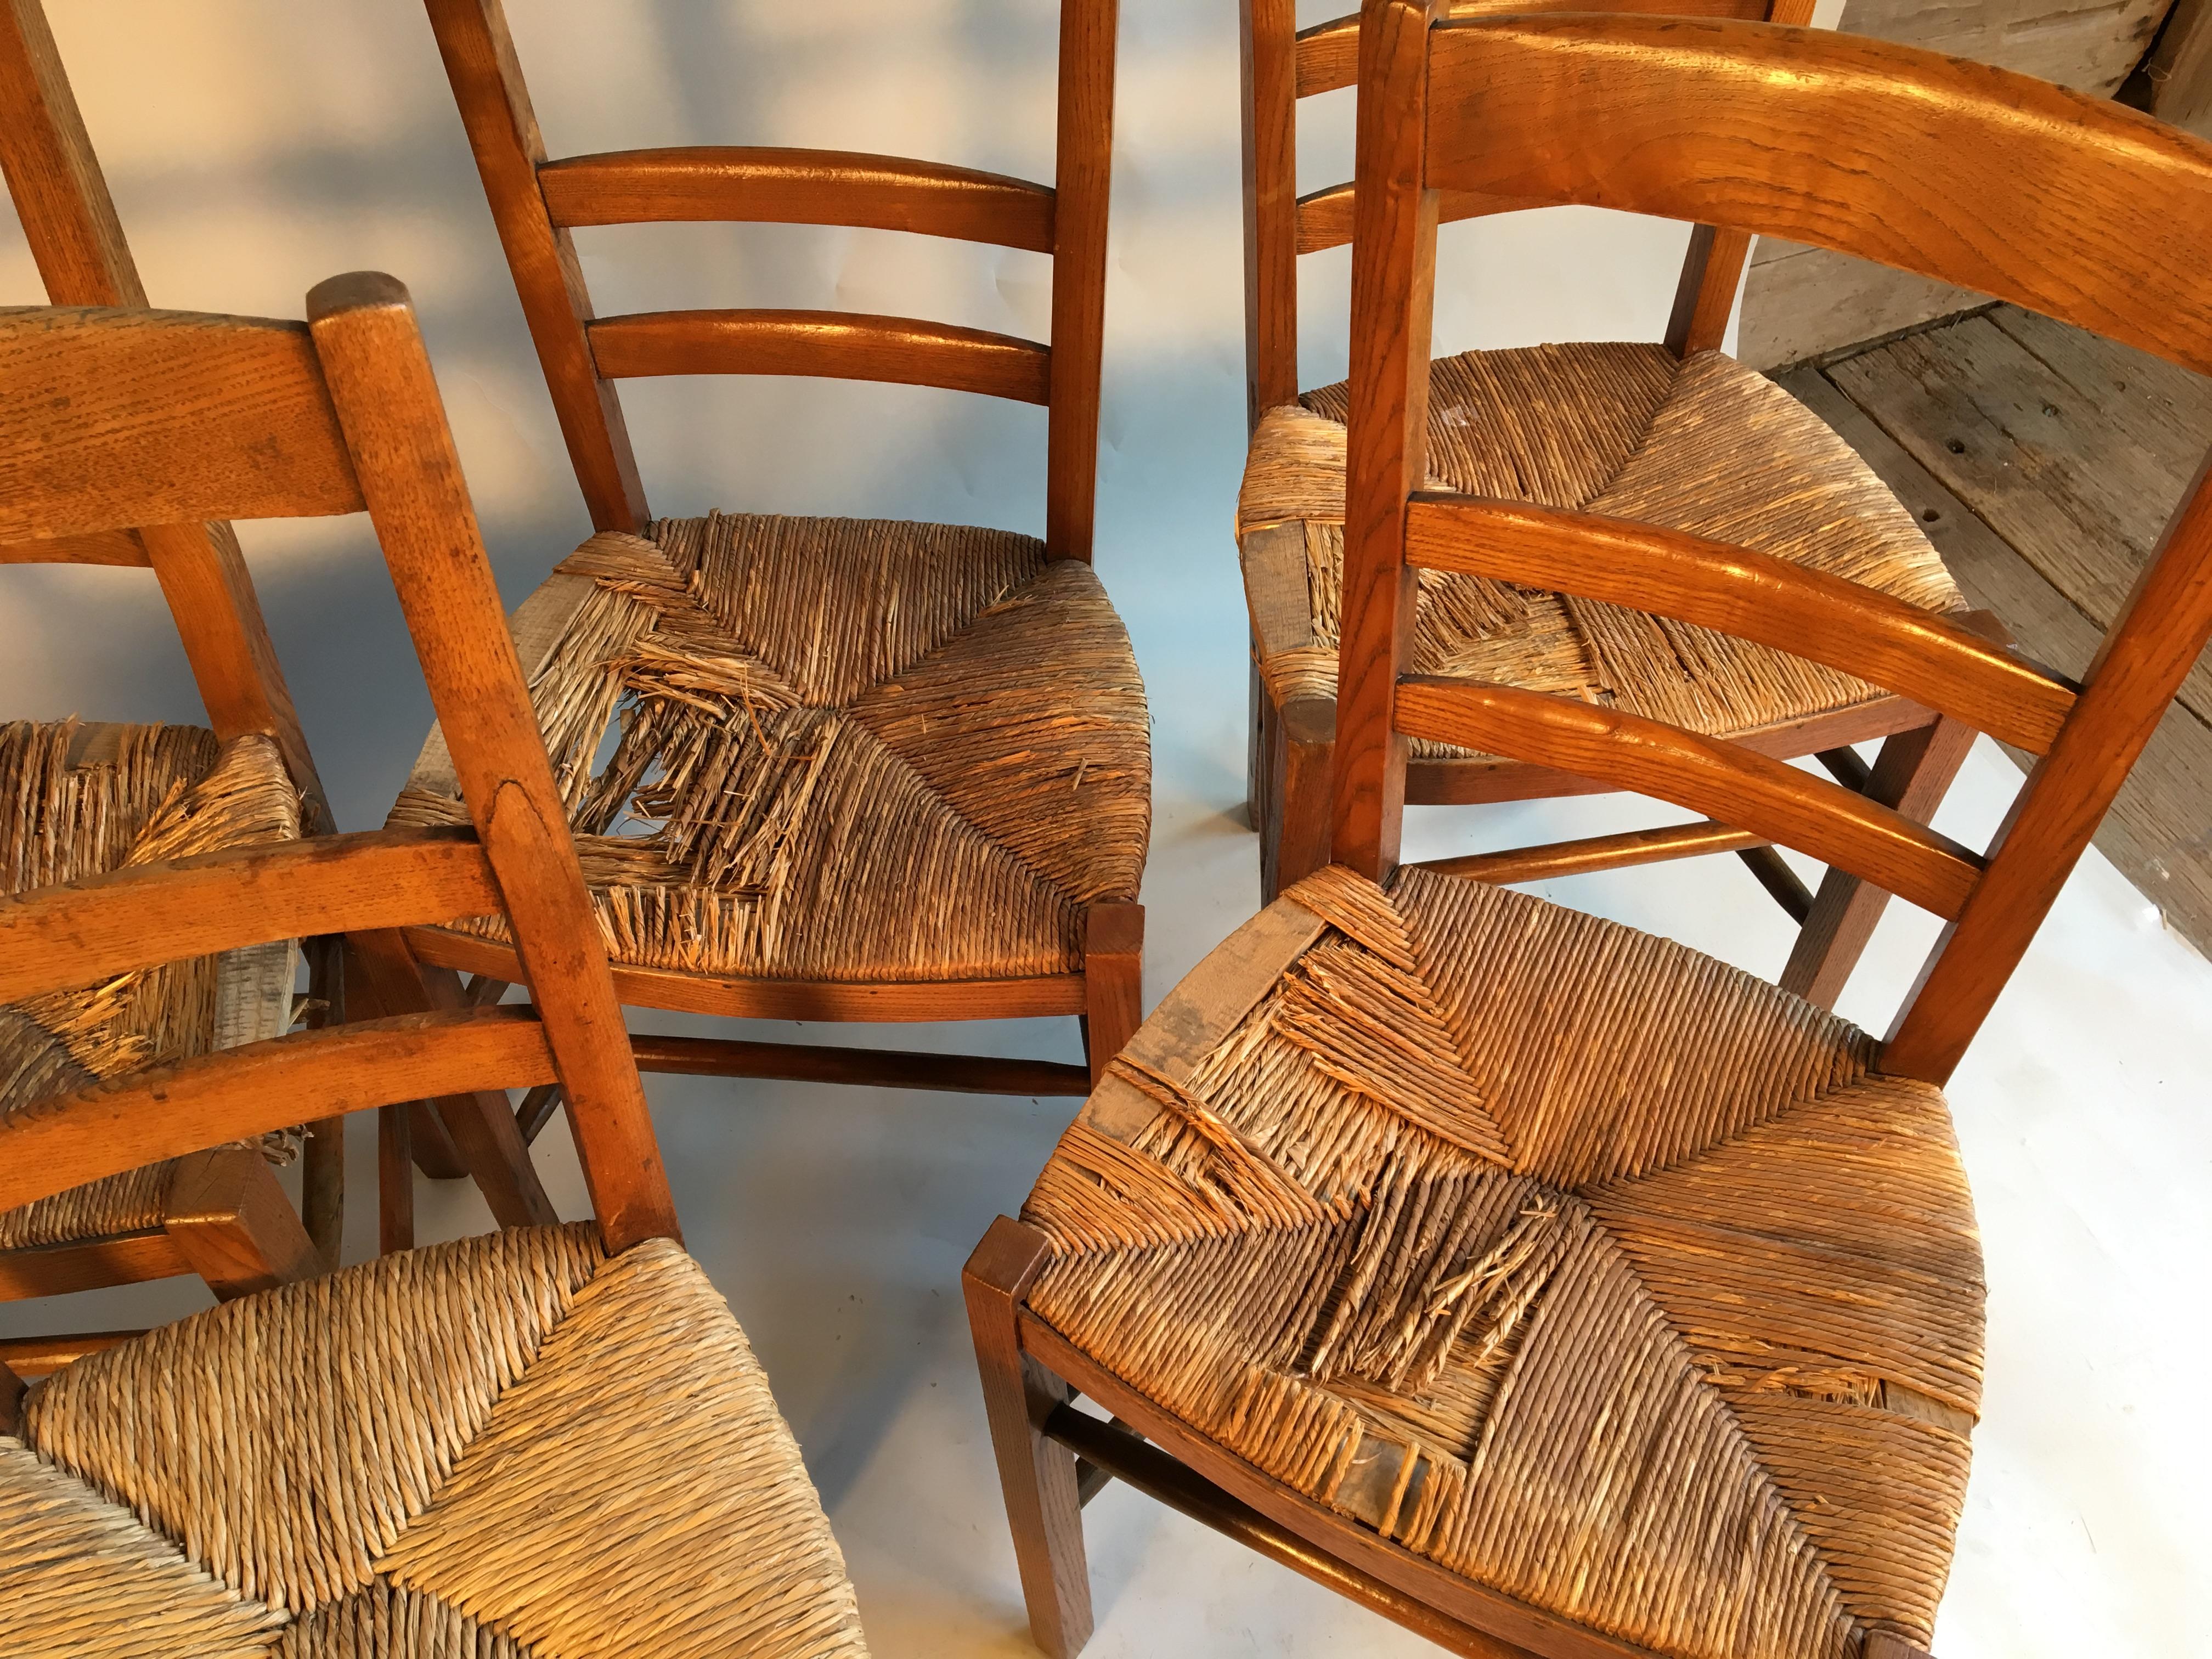 French Provincial Set of 6 French Country Ladder Back Chairs, Mid-19th Century